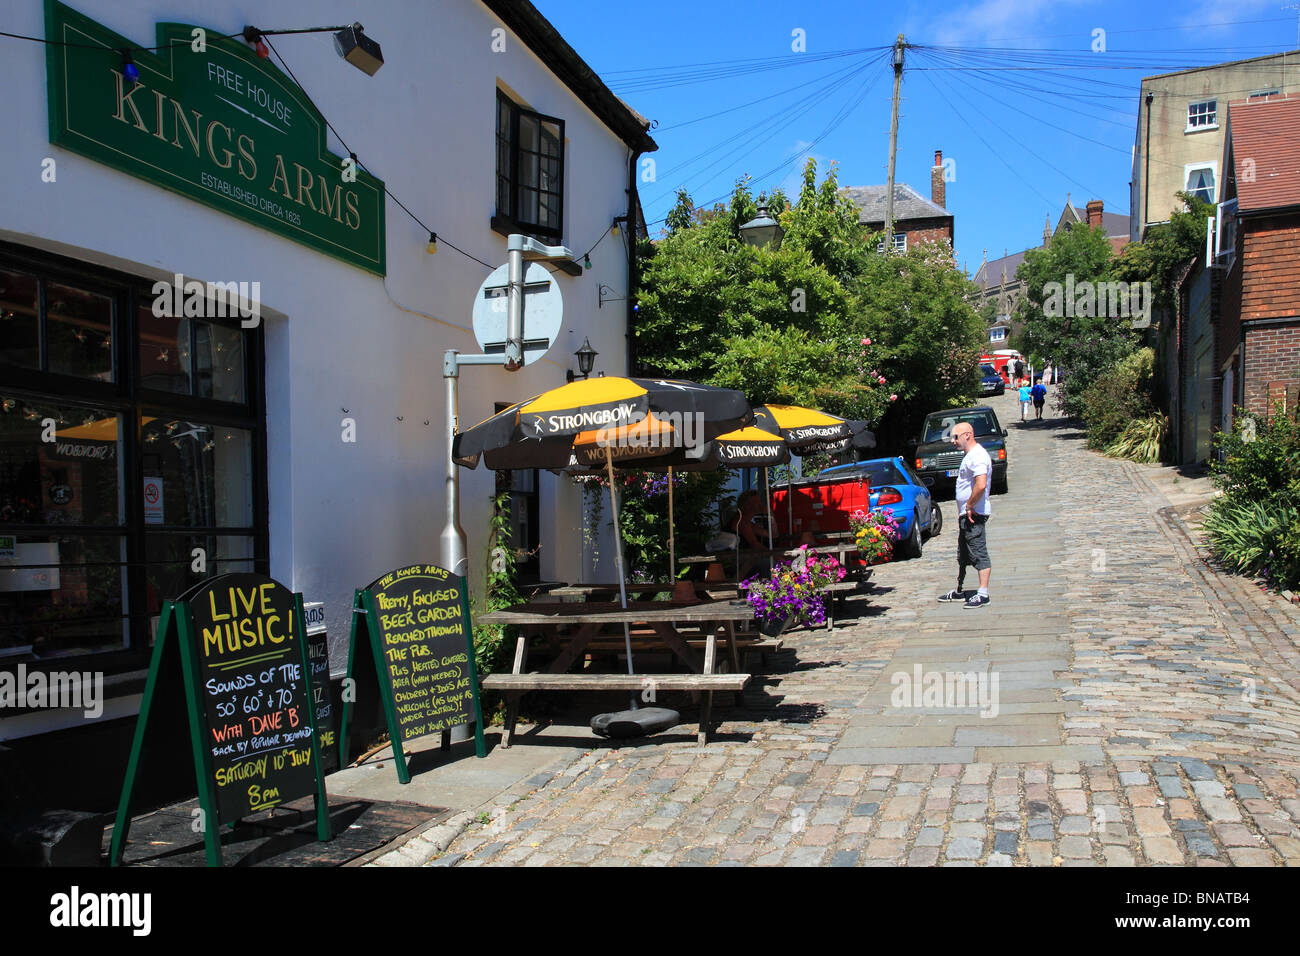 Kings Arms Pub and Kings Arms Hill in Arundel Sussex England Stock Photo